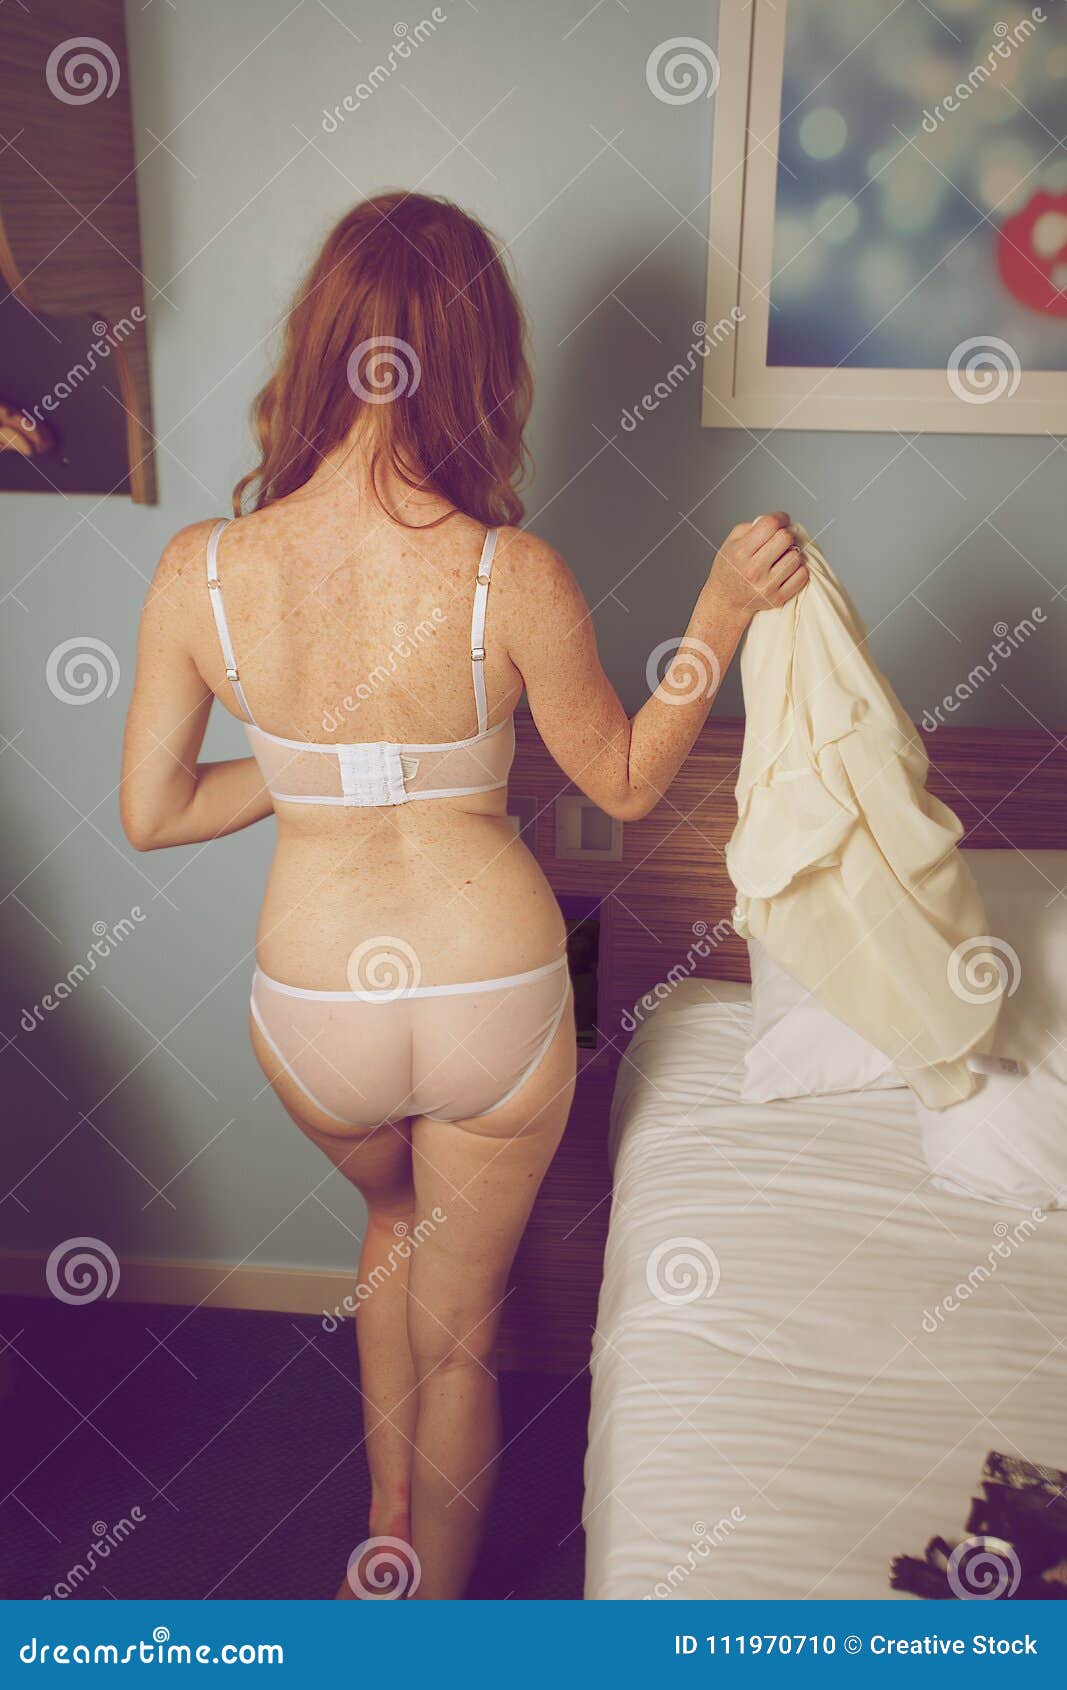 Woman gets undressed stock photo image